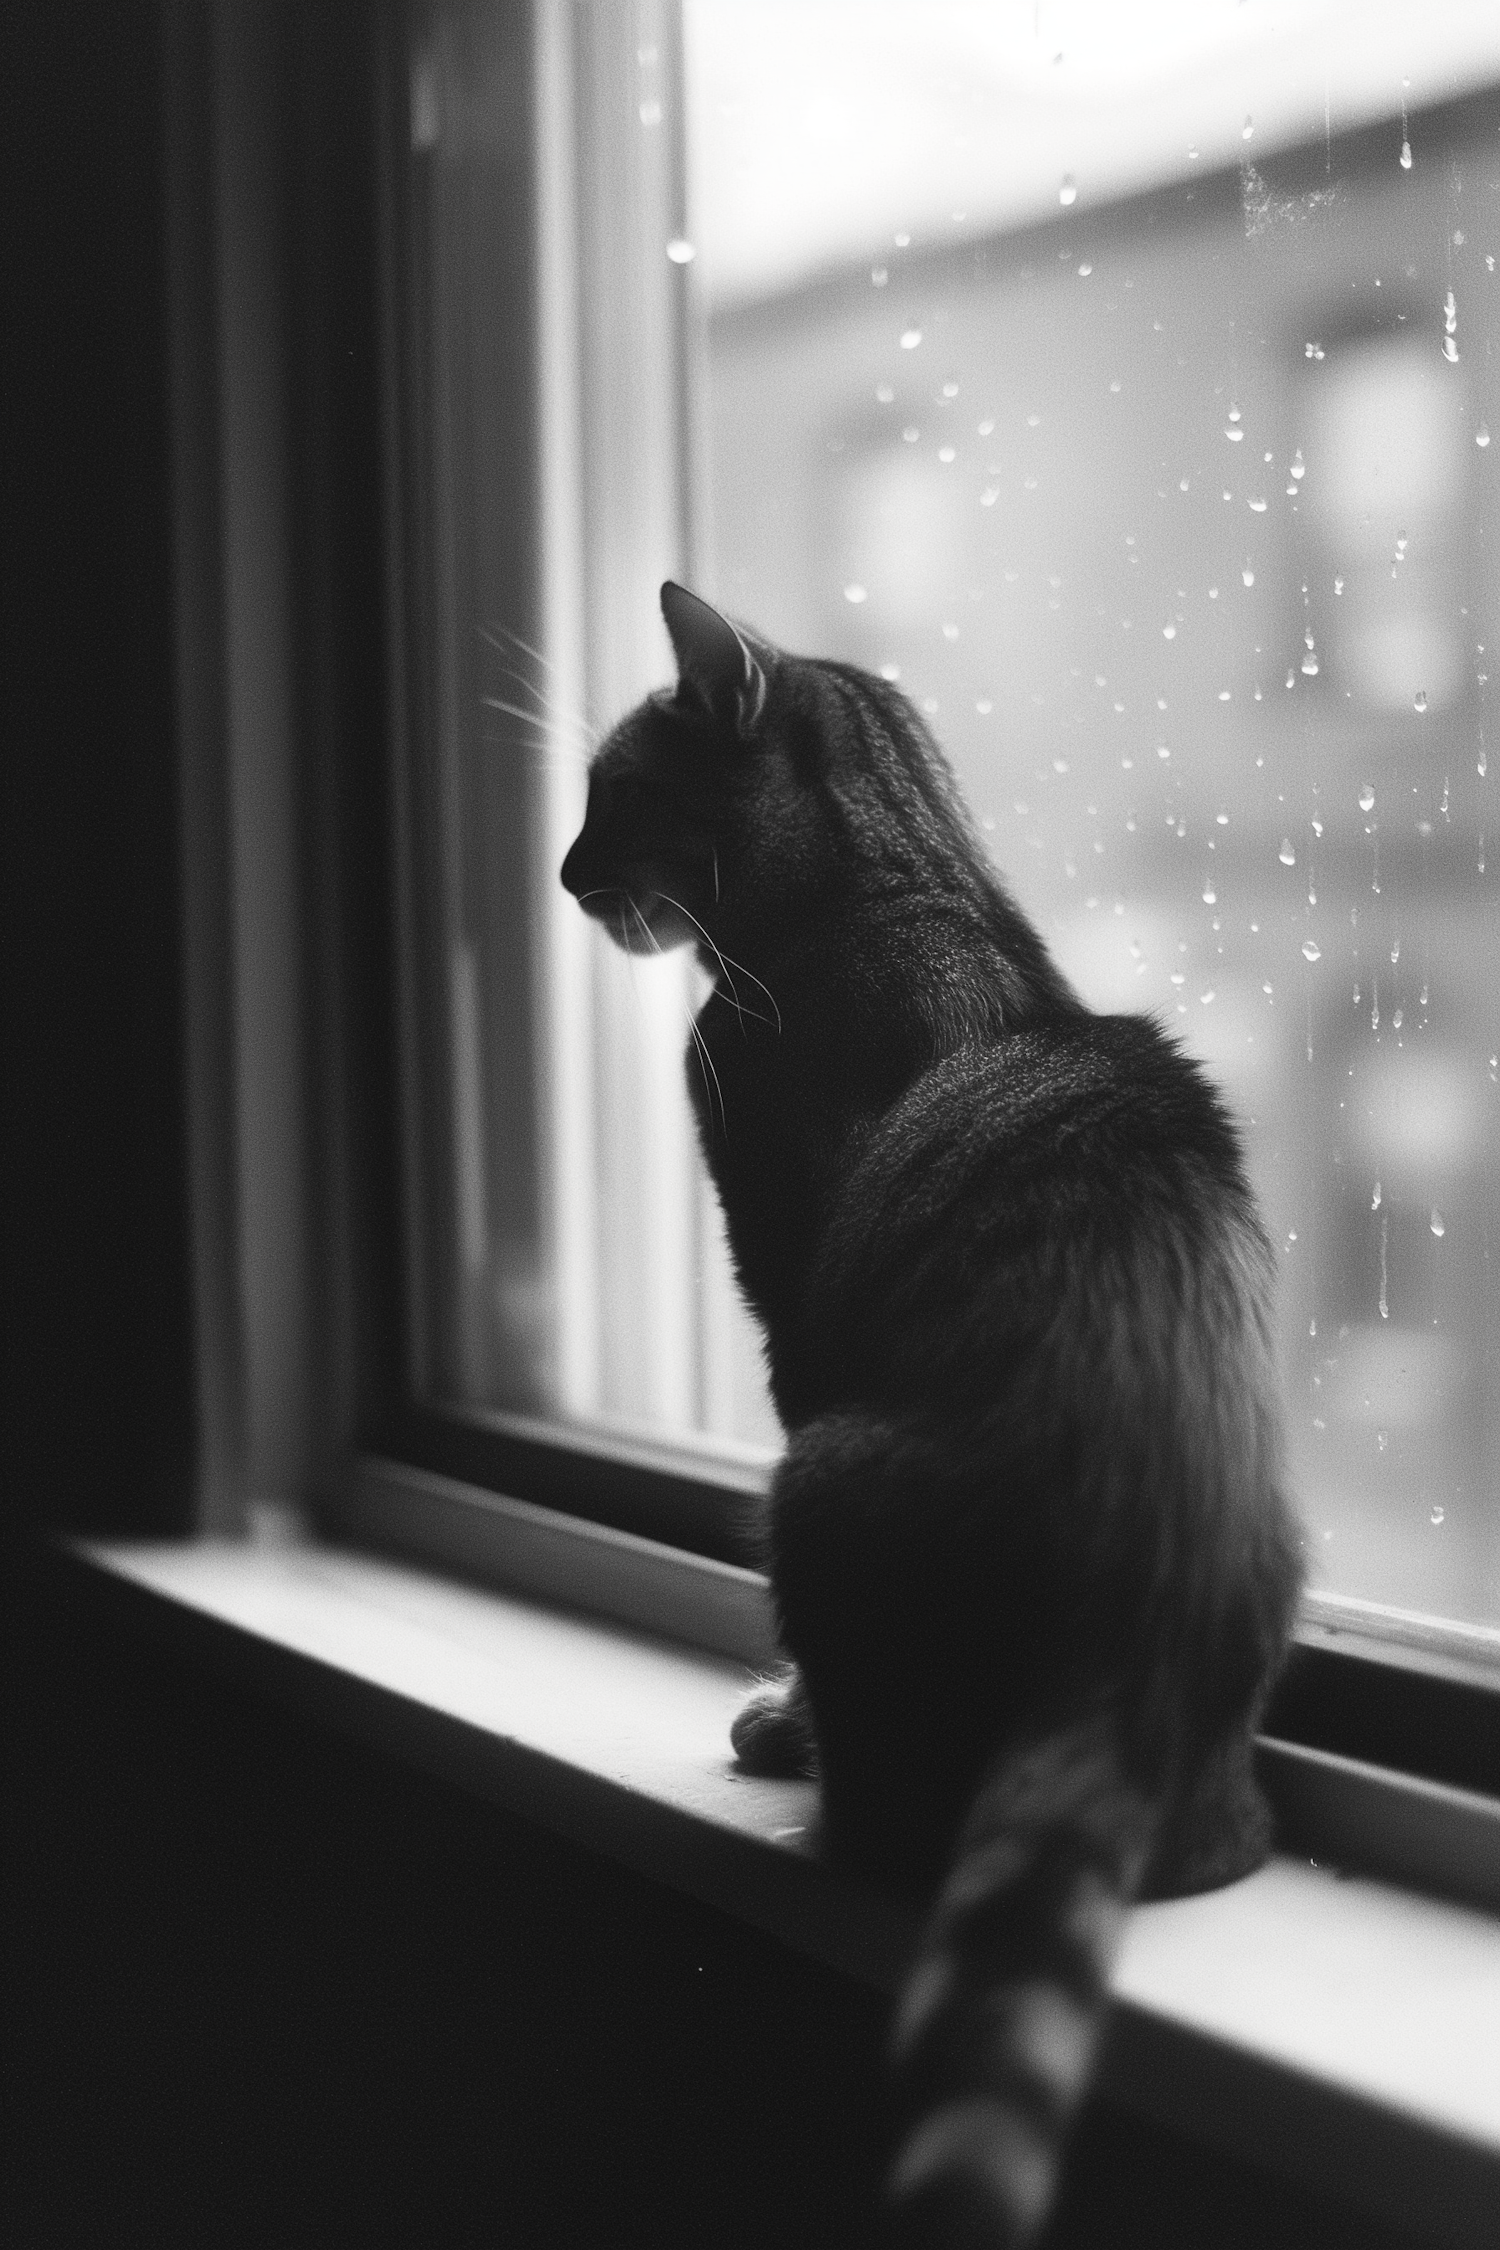 Contemplative Cat by the Window